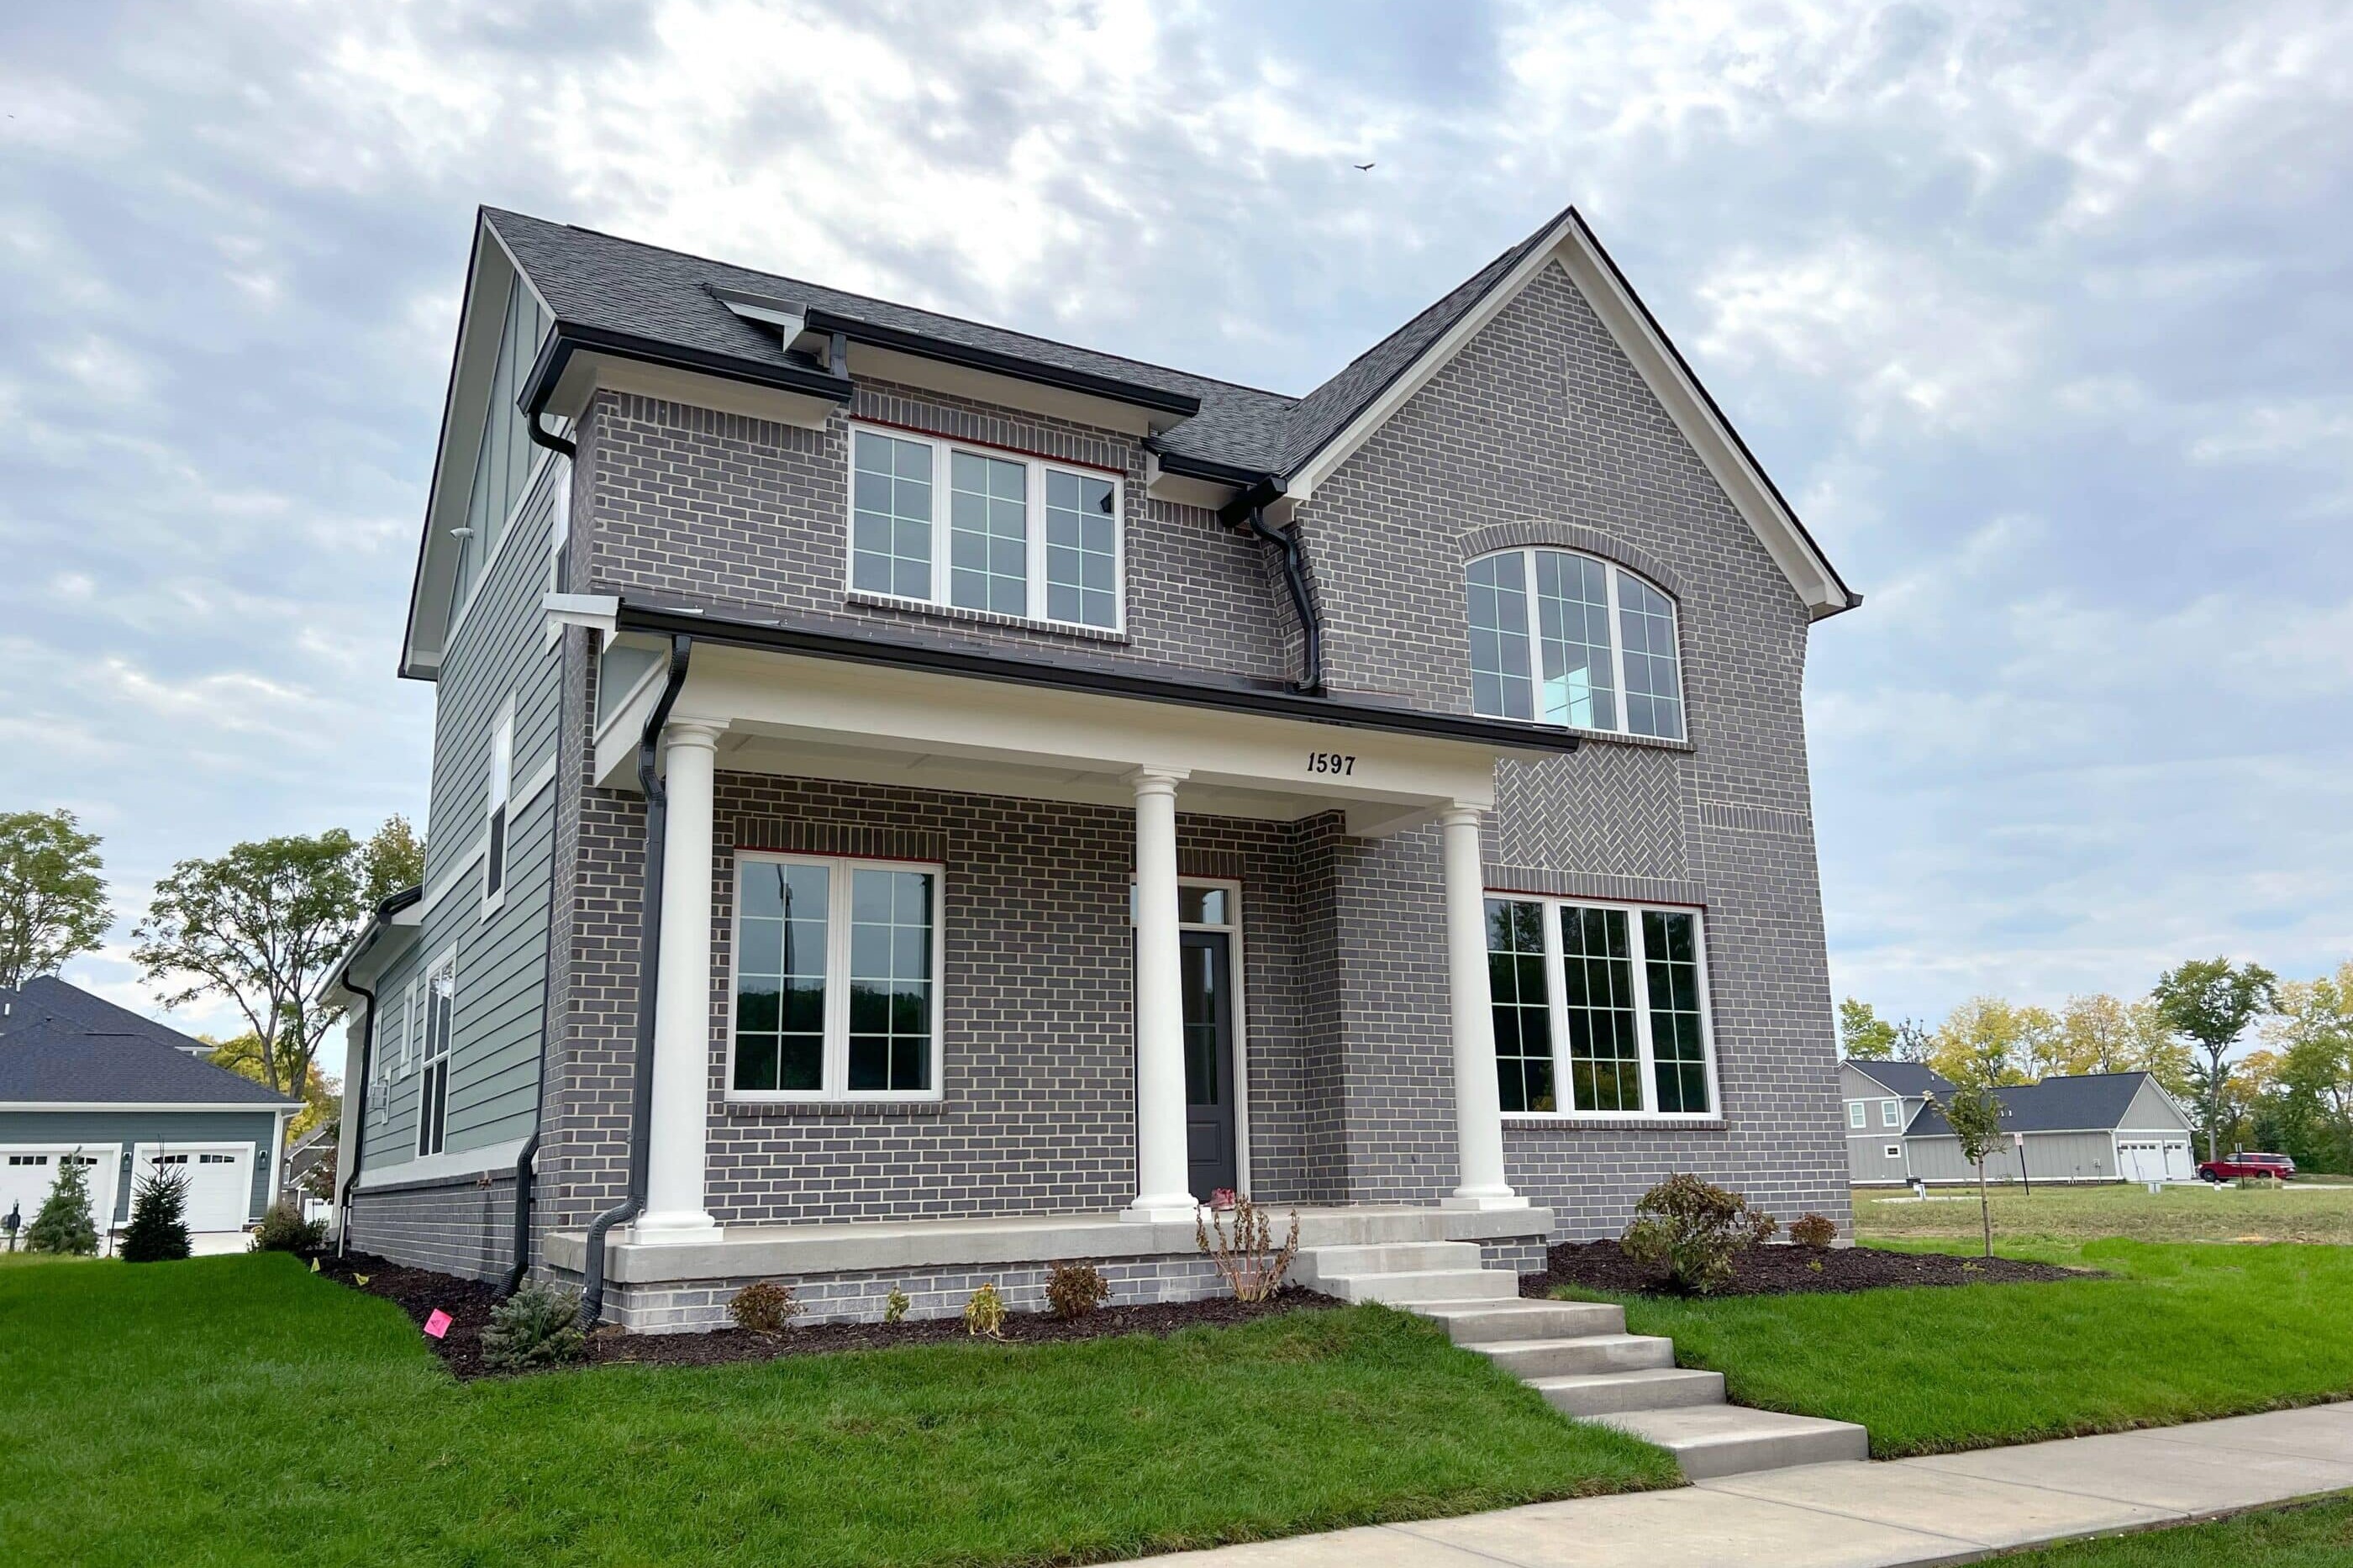 A luxury custom home in Westfield, Indiana, featuring a gray exterior with white trim and a charming front porch.